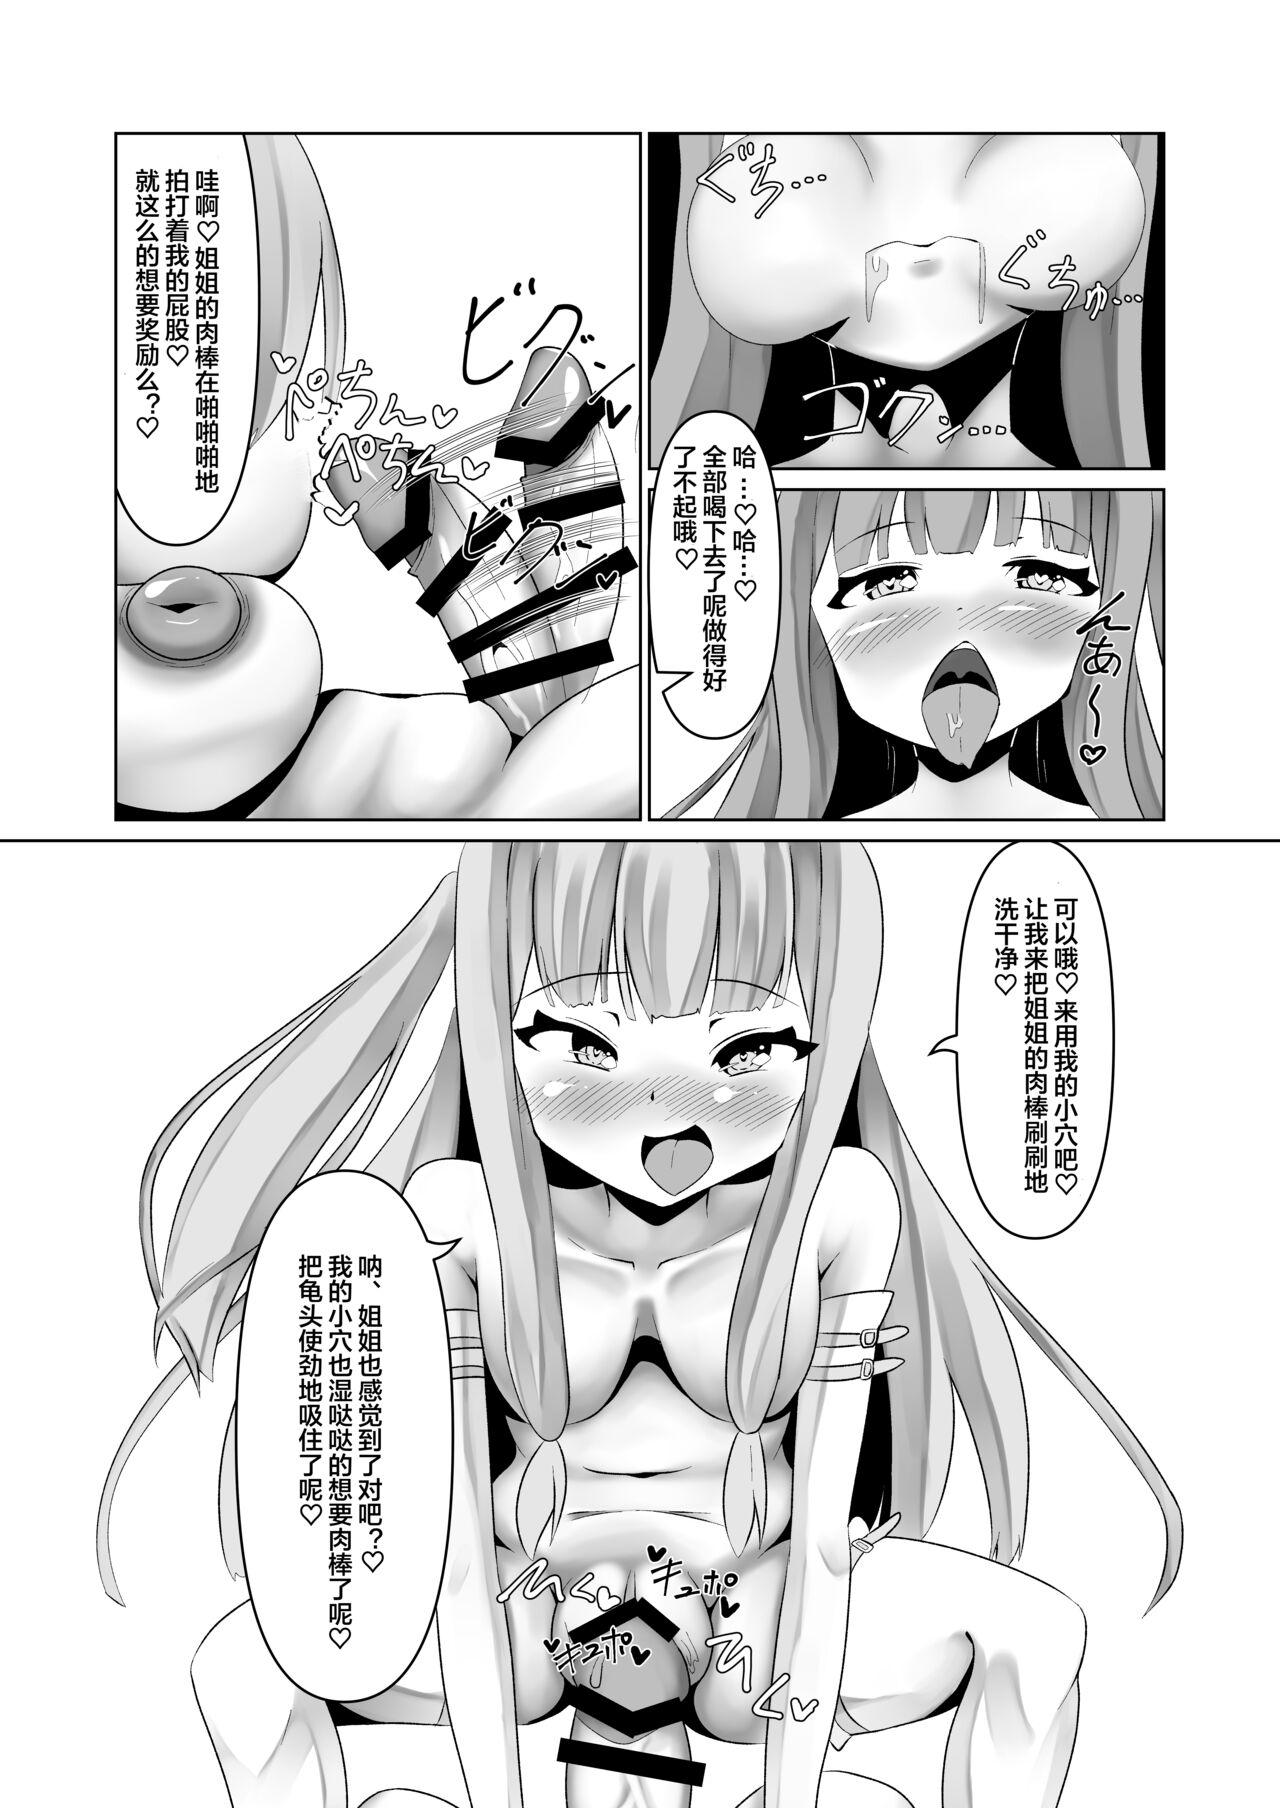 Best Blowjob 葵ちゃんの性処理玩具 - Voiceroid 19yo - Page 11